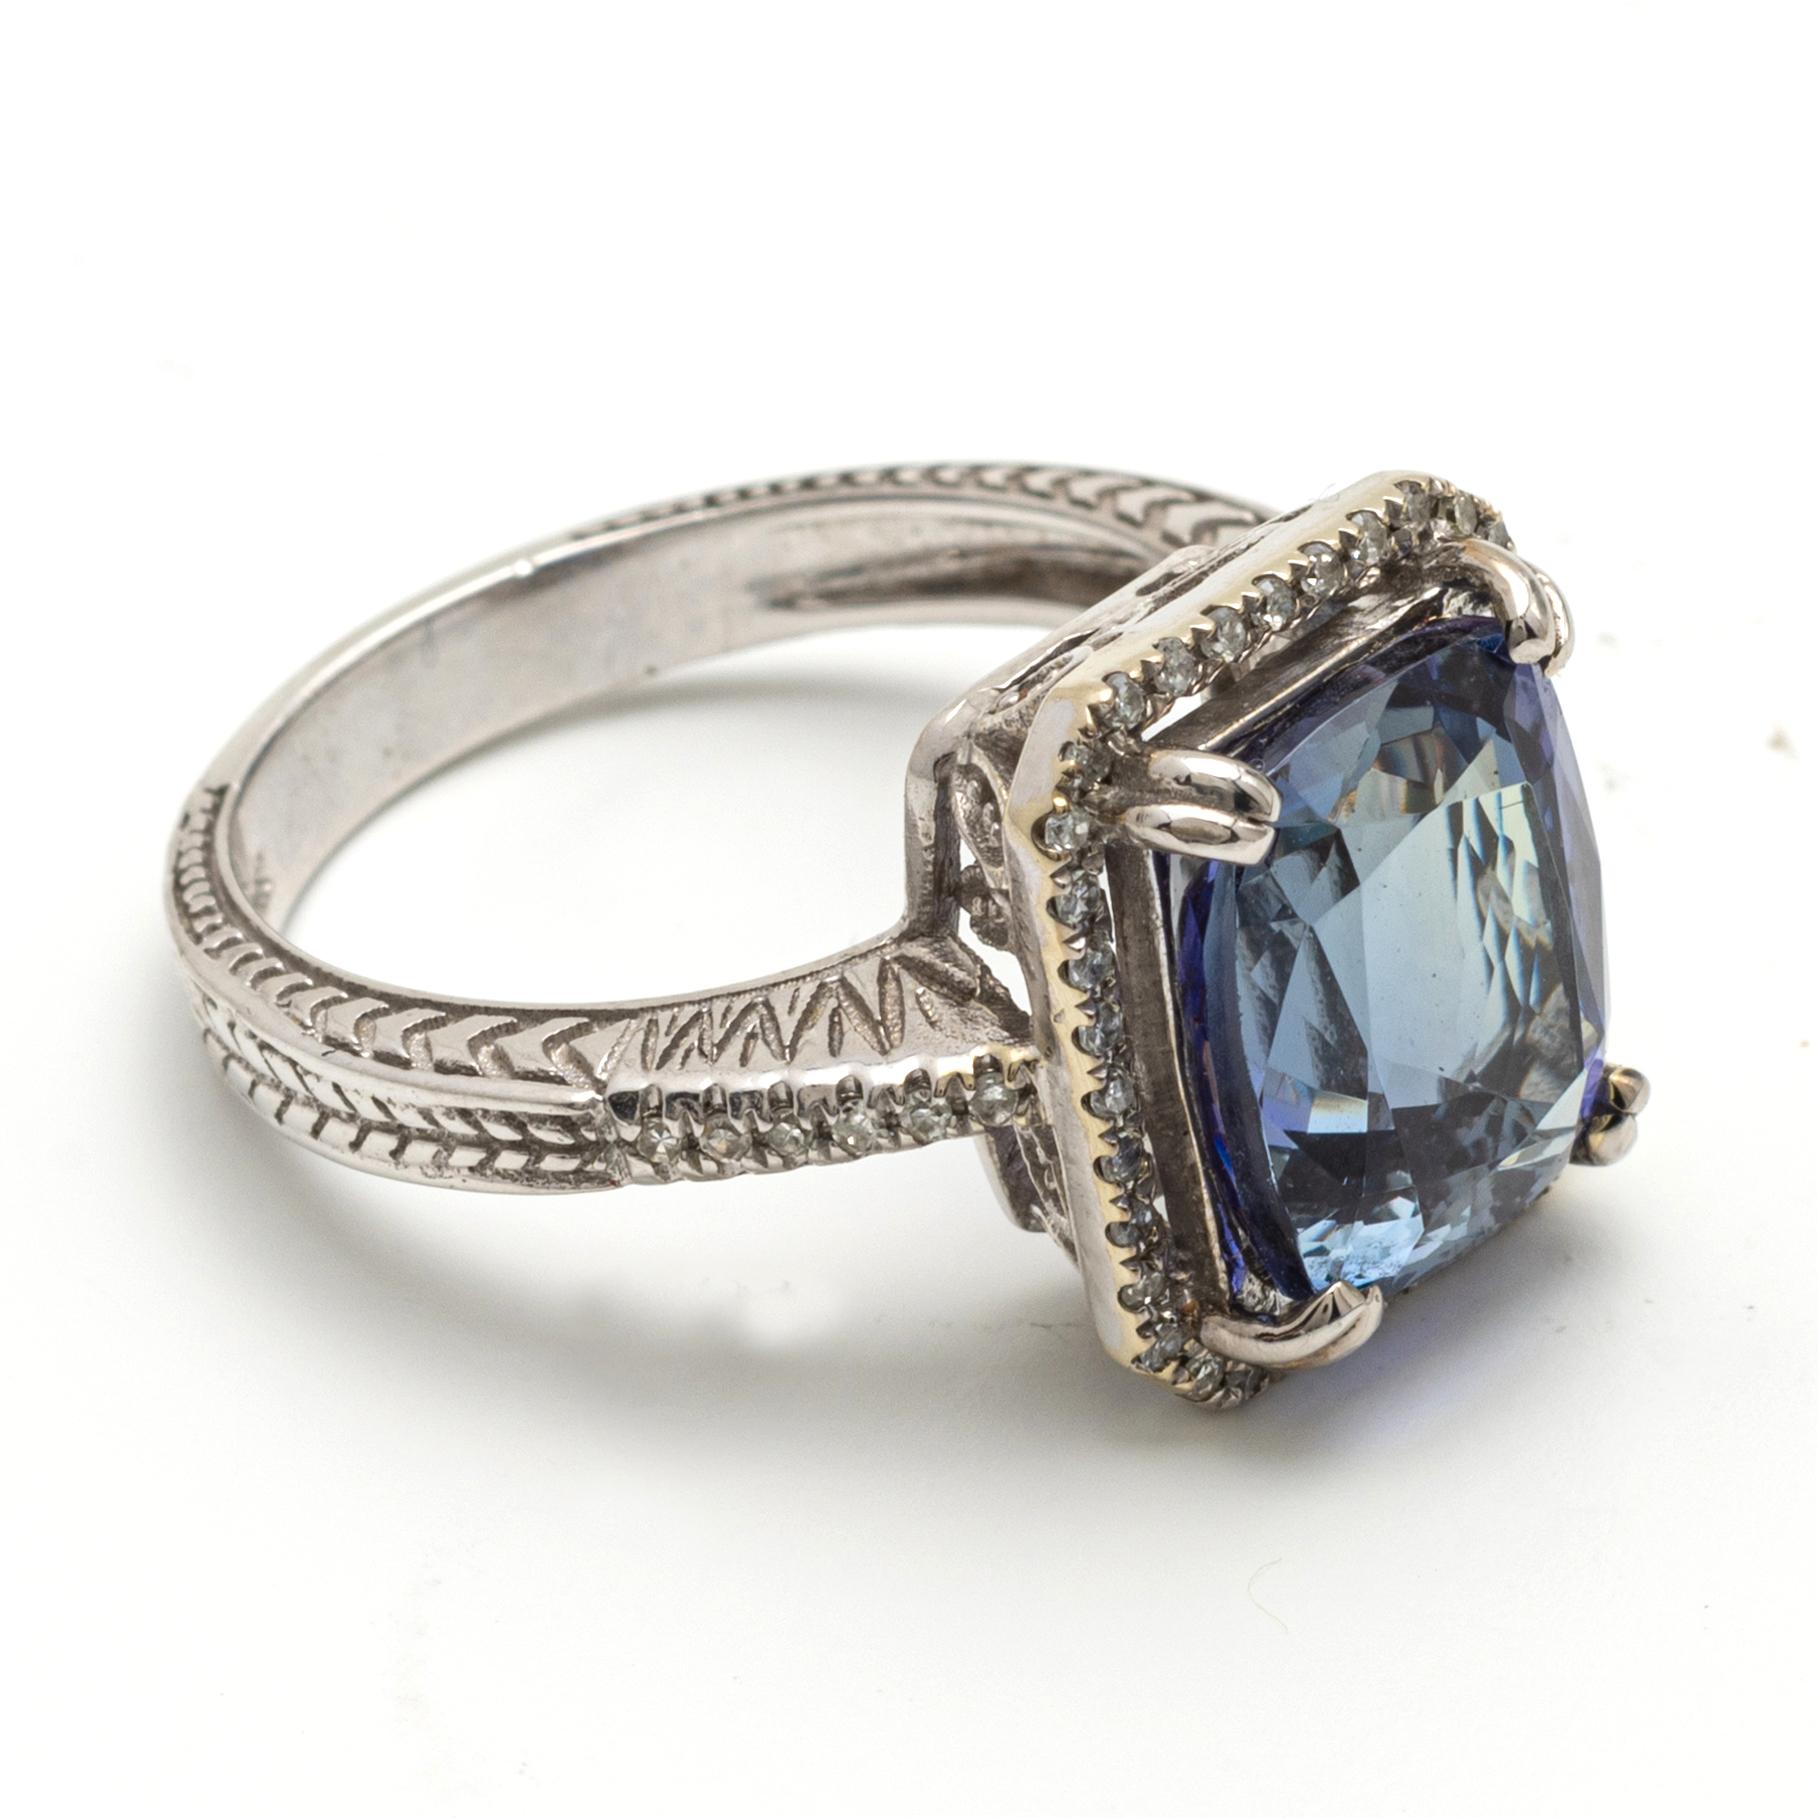 Blue Topaz Ring, claw set with an emerald-cut blue topaz, measuring approximately 8.1 x 10.1 mm, mounted in 14 karat white gold, size 6